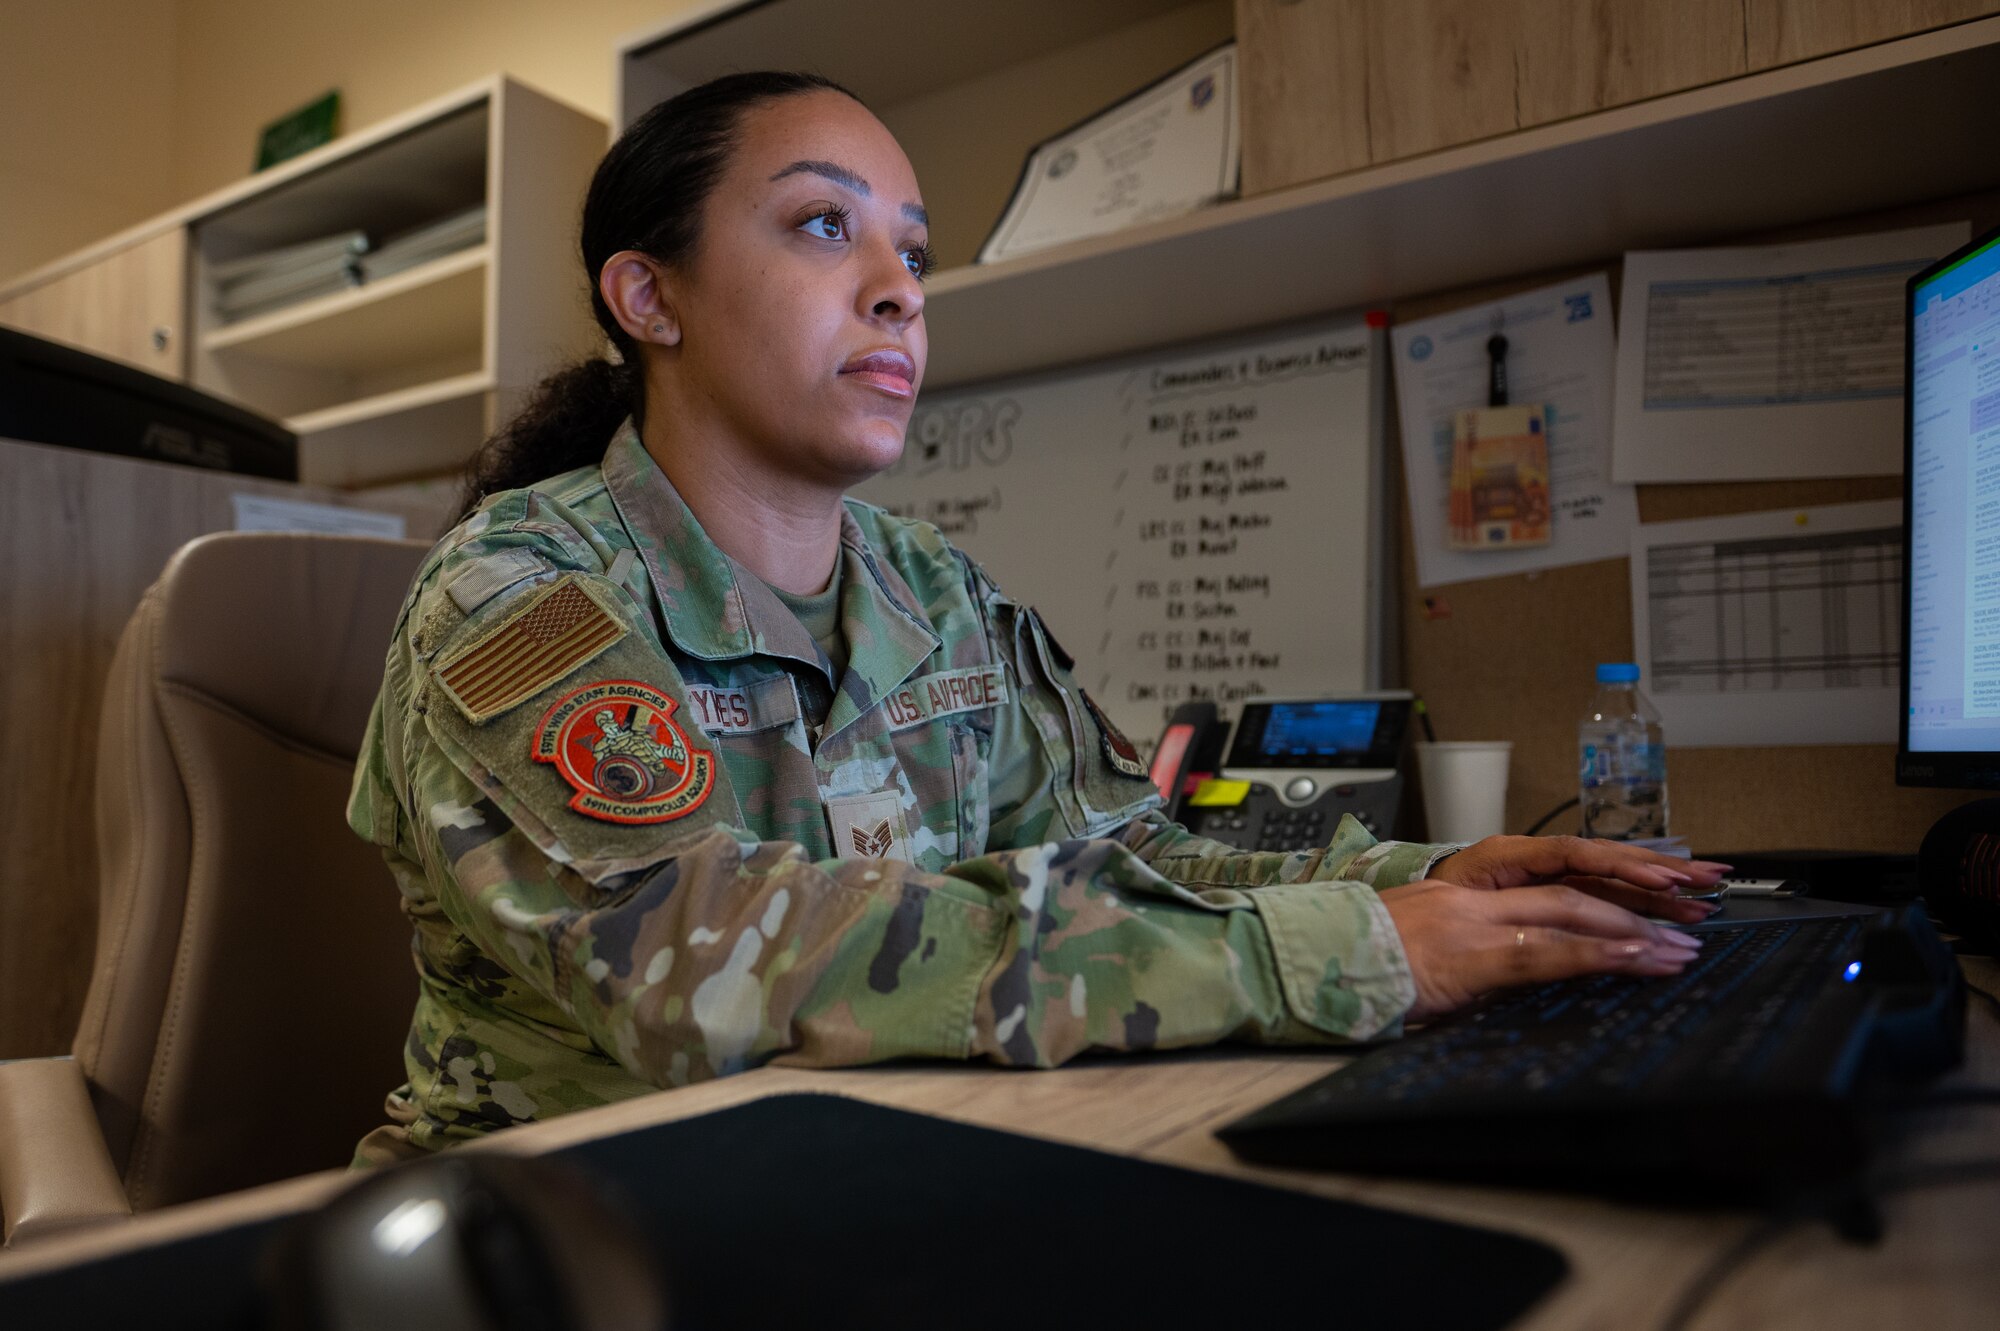 A female Airman works on a computer.